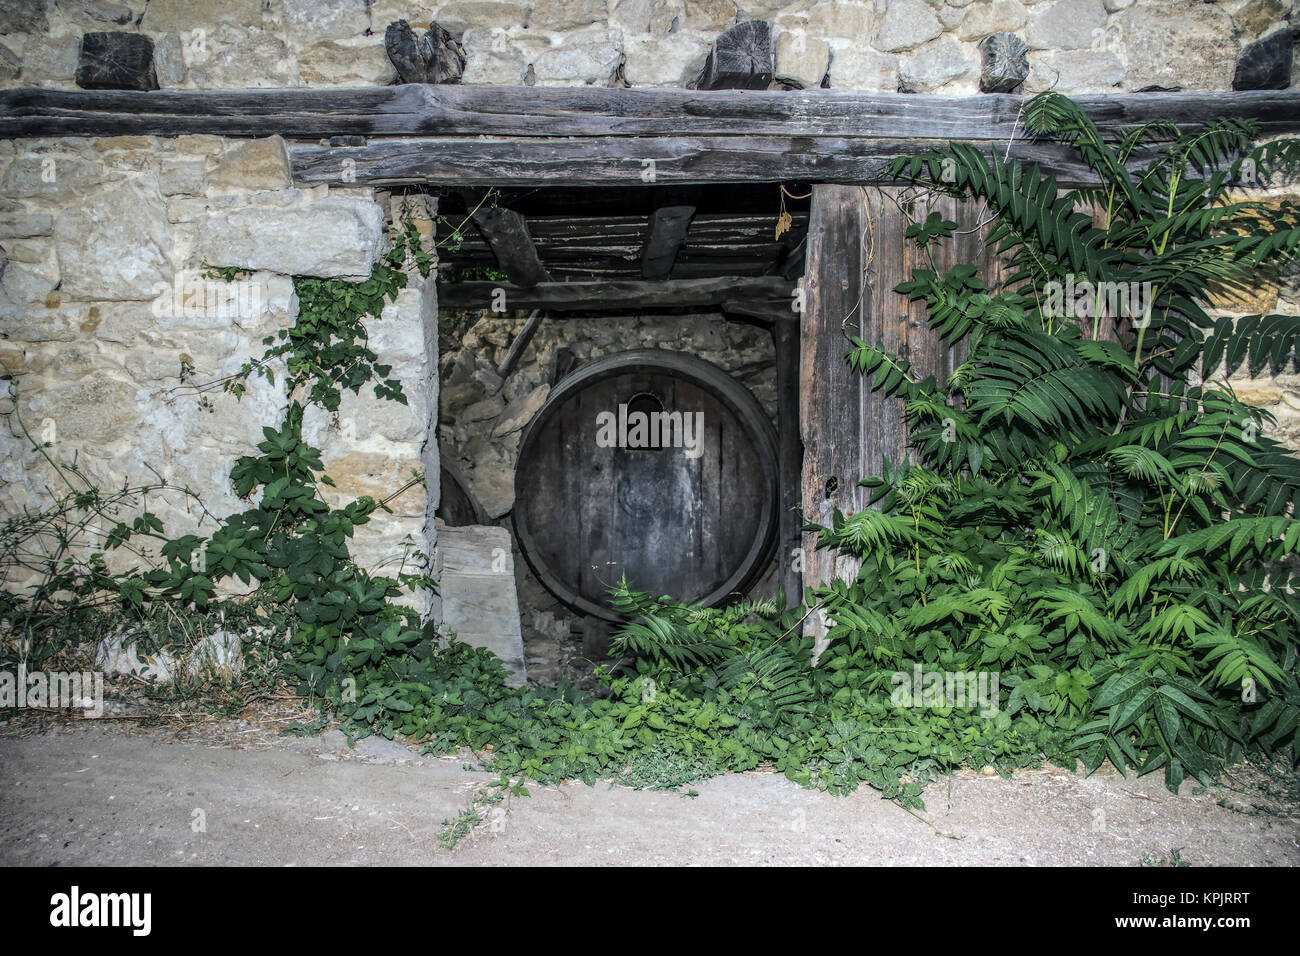 Countryside, East Serbia - Entrance to an abandoned and decaying winery Stock Photo